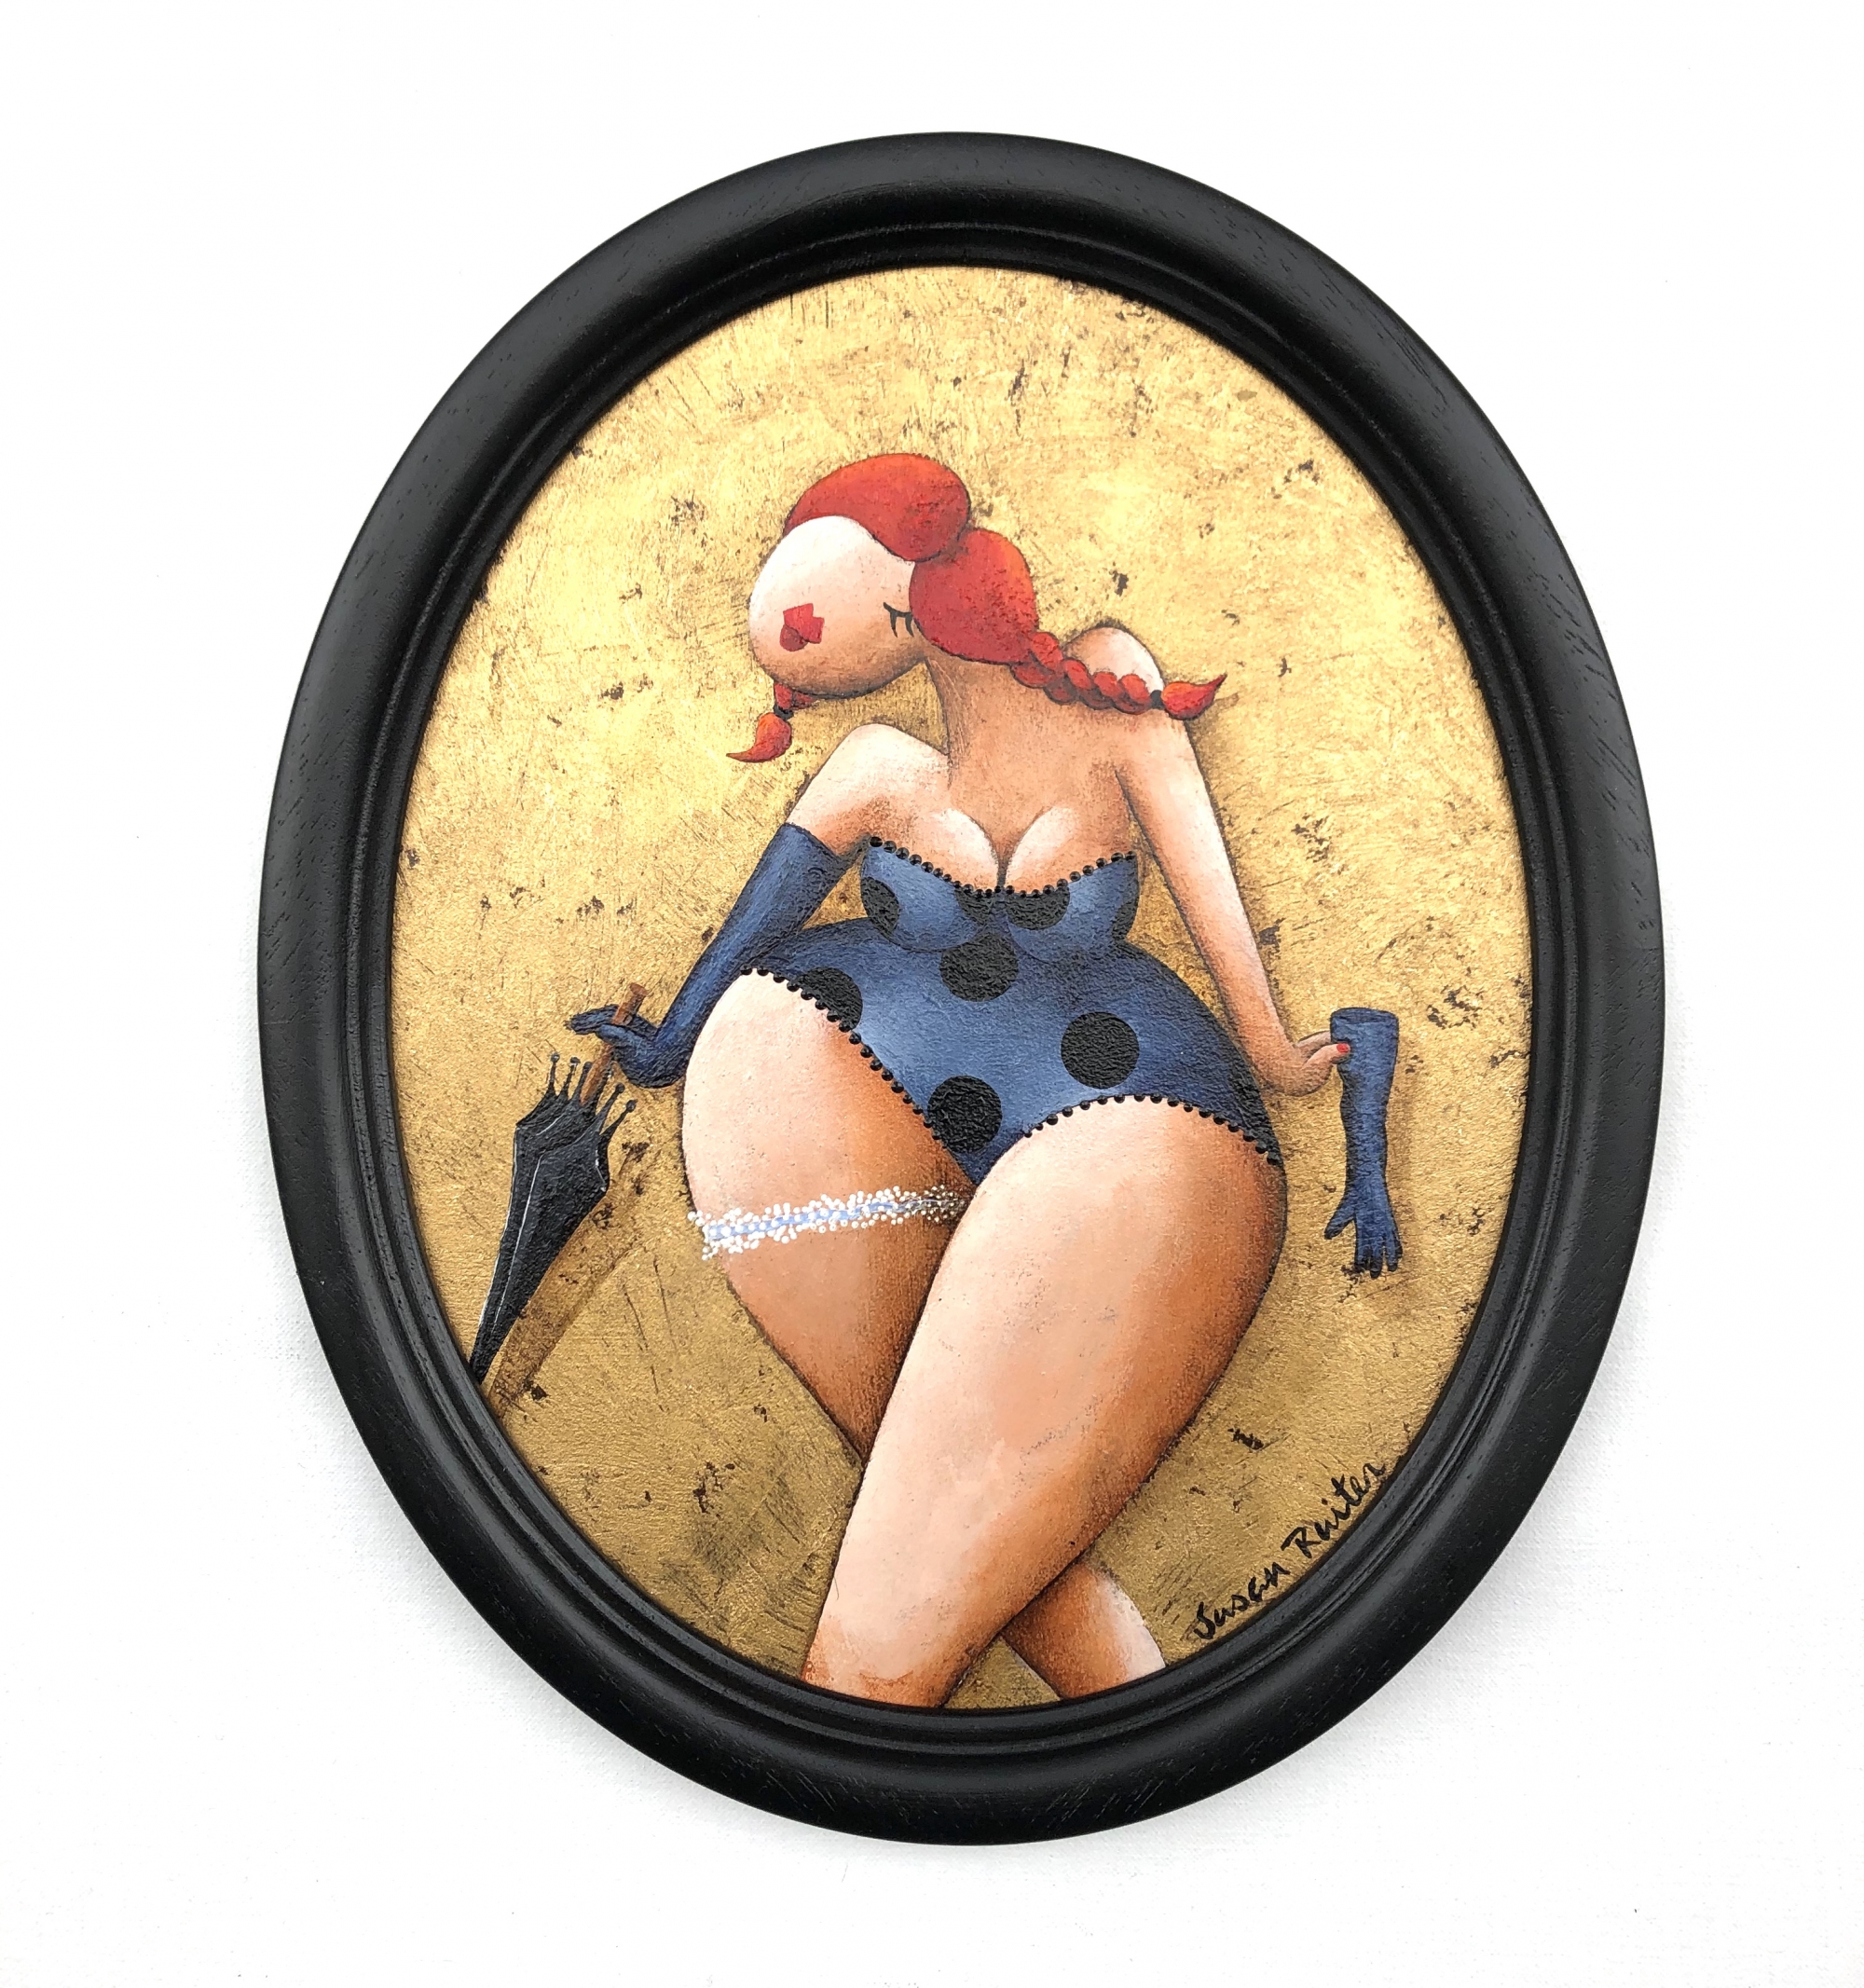 CURVY WOMEN PAINTINGS - and everything you need to know about it